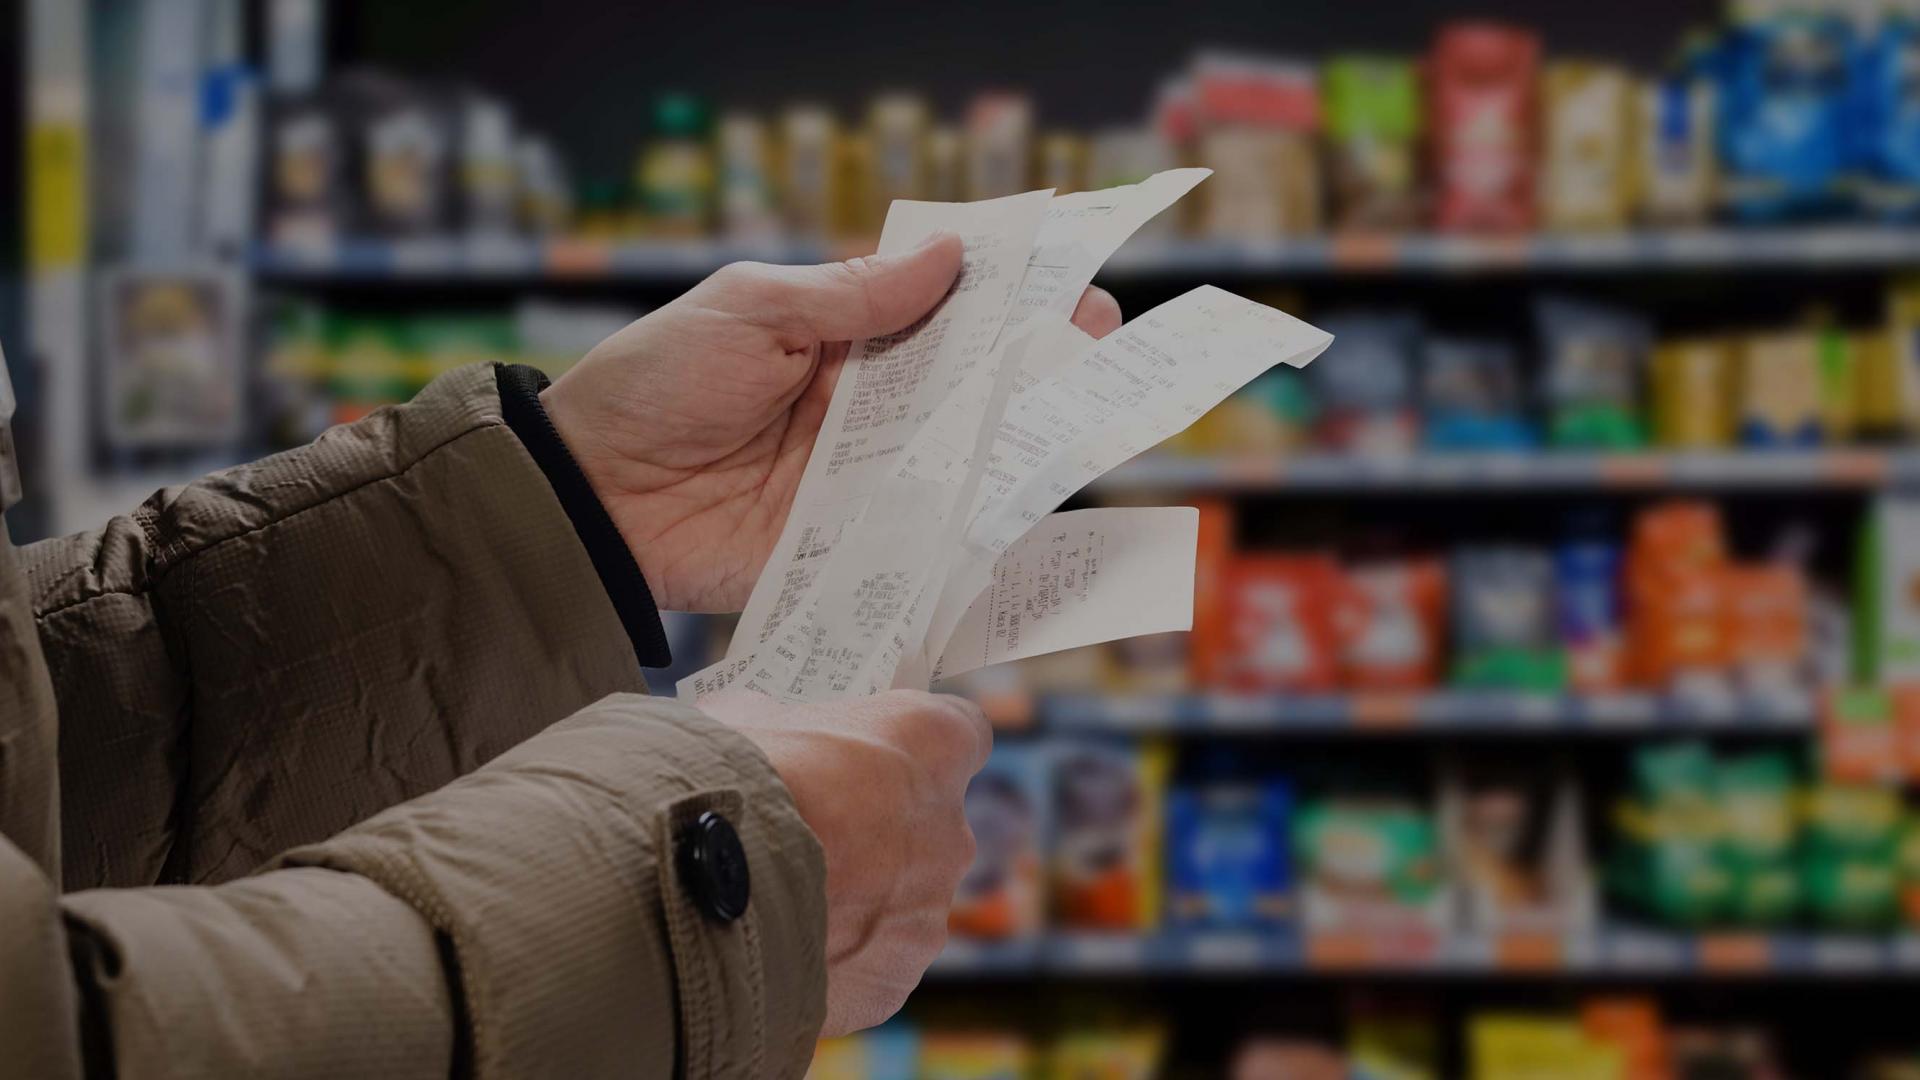 Holding receipts in a supermarket